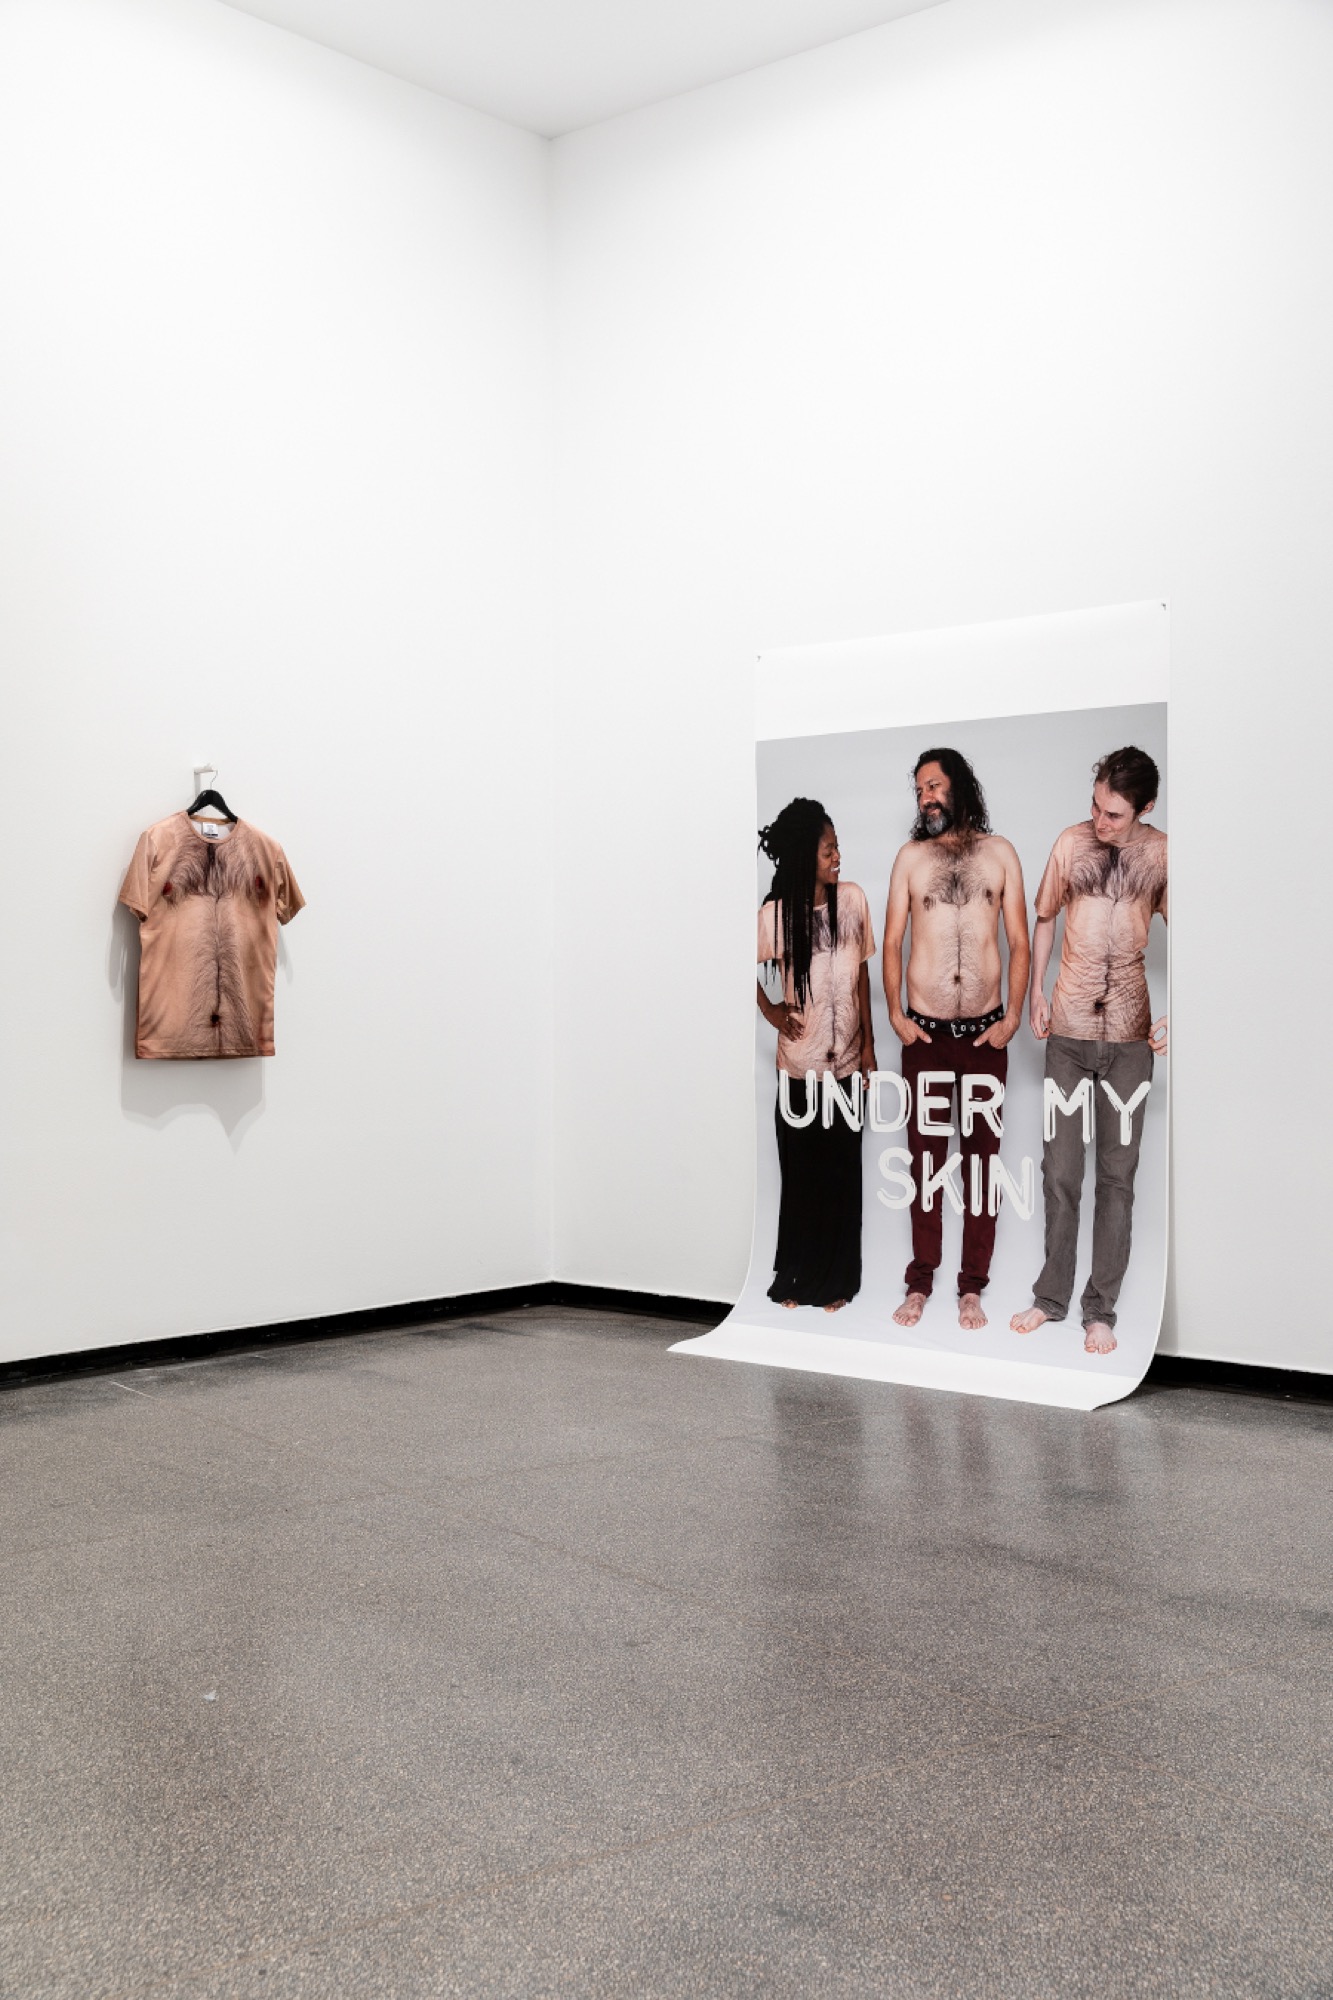 Archie Moore,<em>My Skin</em> 2019; <em>Under my skin</em> 2019, installation view, Australian Centre for Contemporary Art, Melbourne. Courtesy the artist and The Commercial, Sydney. Photograph: Andrew Curtis.